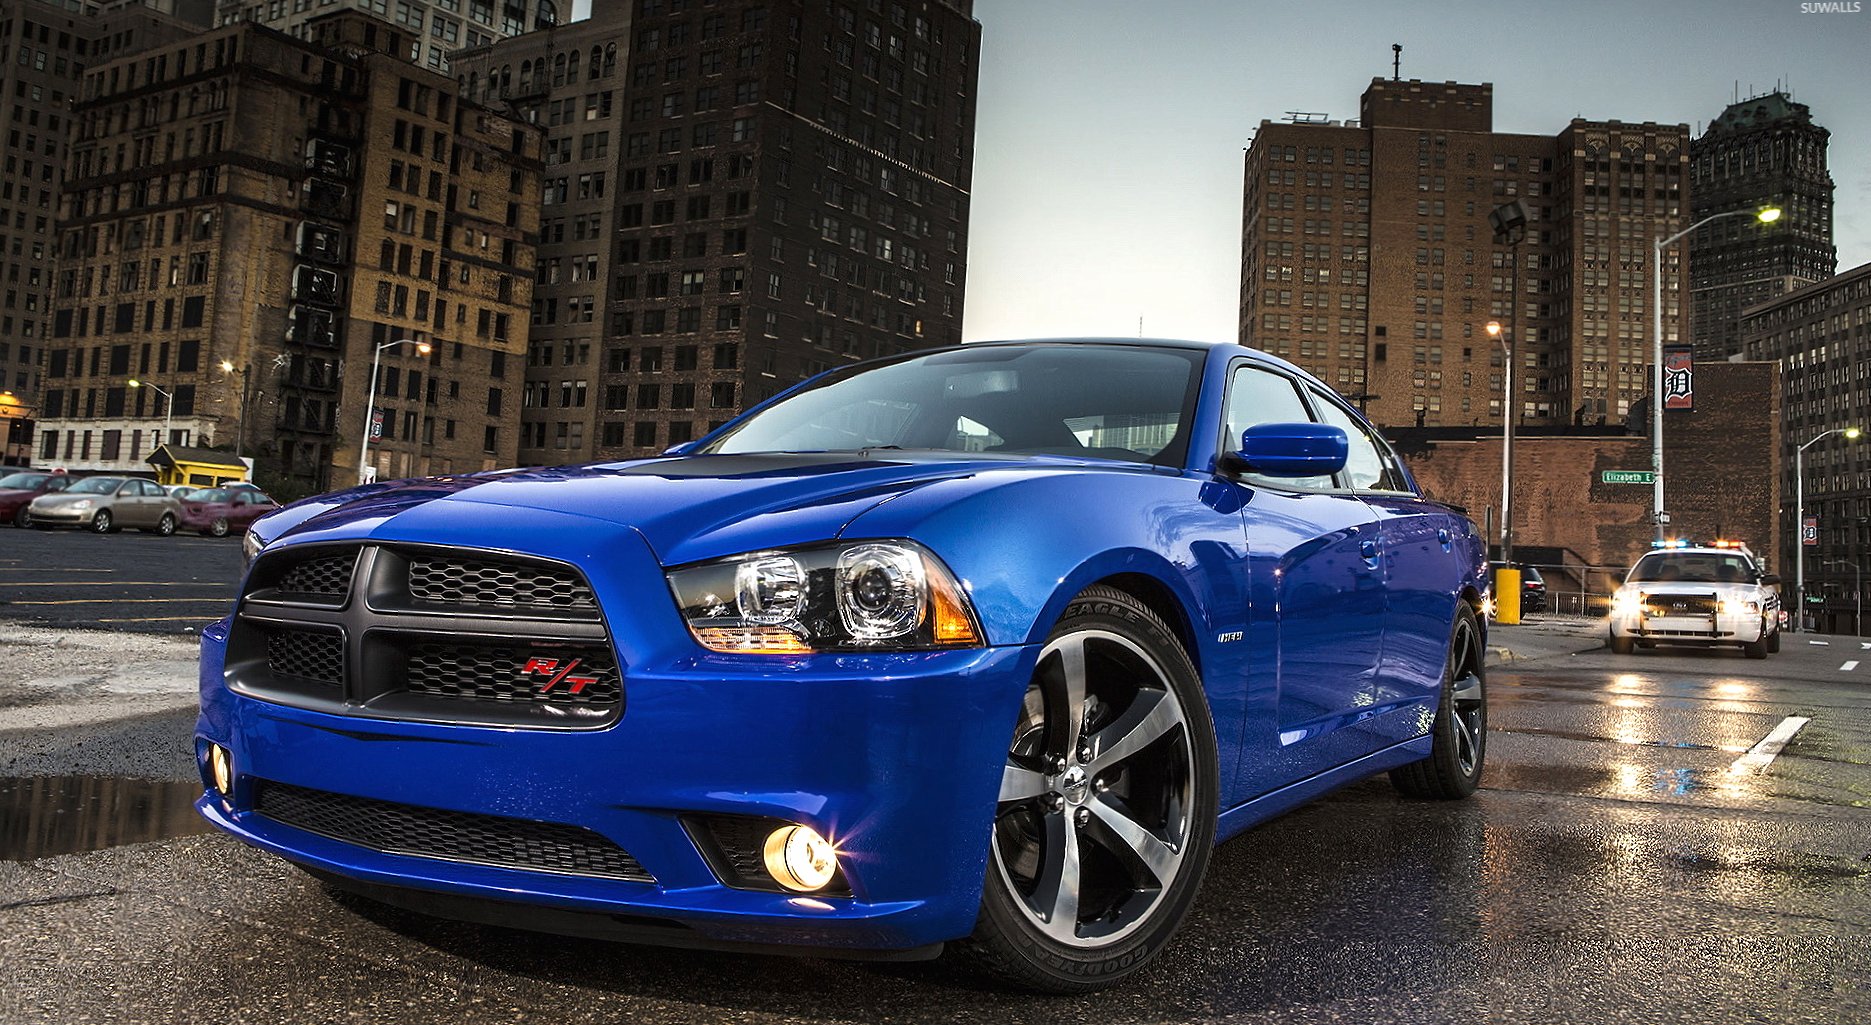 2013 Blue Dodge Charger in the city wallpapers HD quality